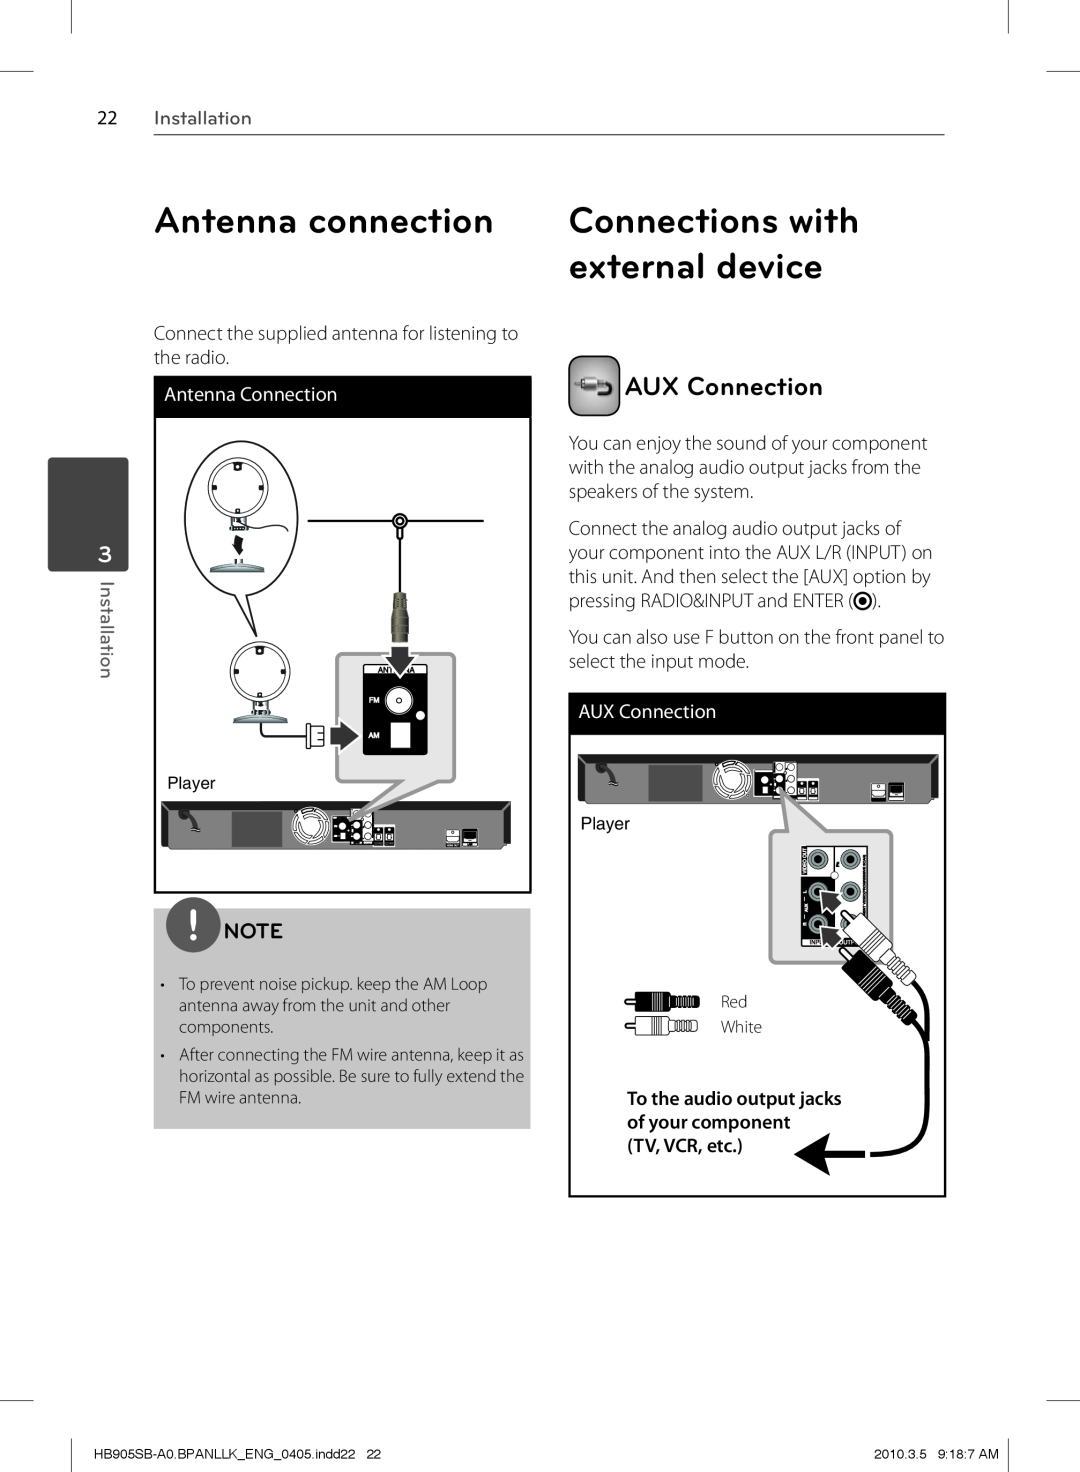 LG Electronics HB905SB owner manual Antenna connection, external device, Connections with, AUX Connection, 22Installation 